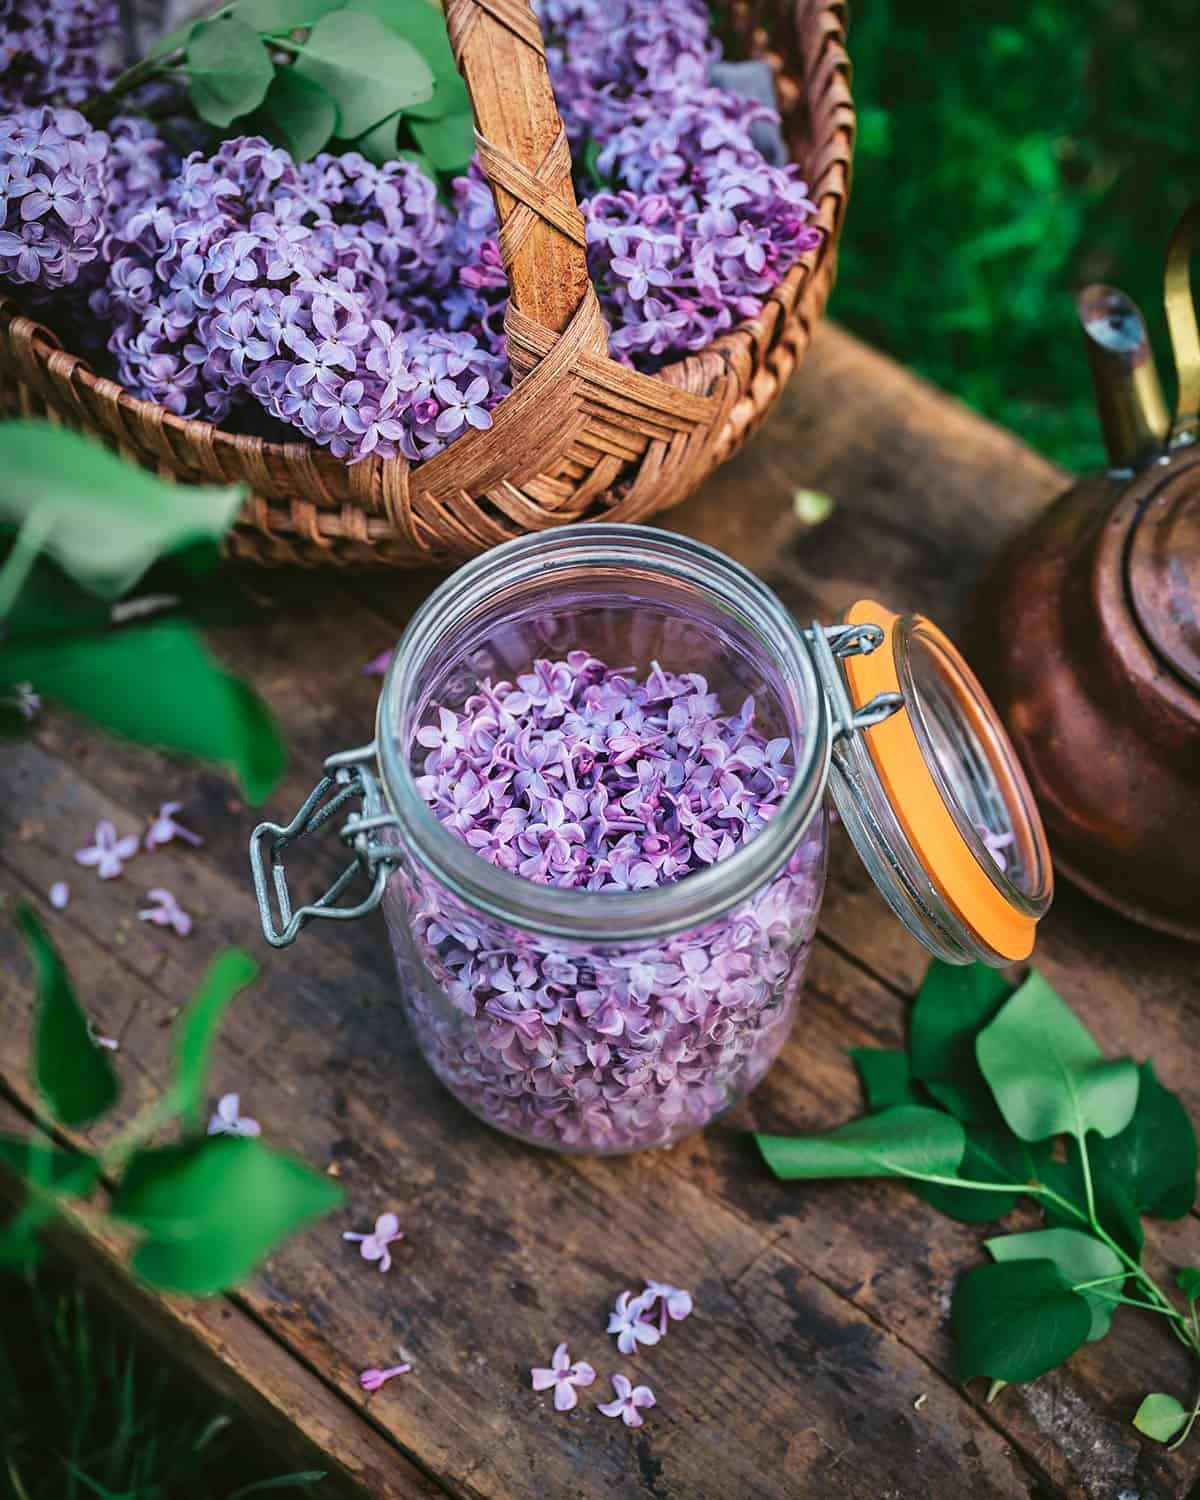 An open jar filled with lilac flowers that have been plucked from their stem.